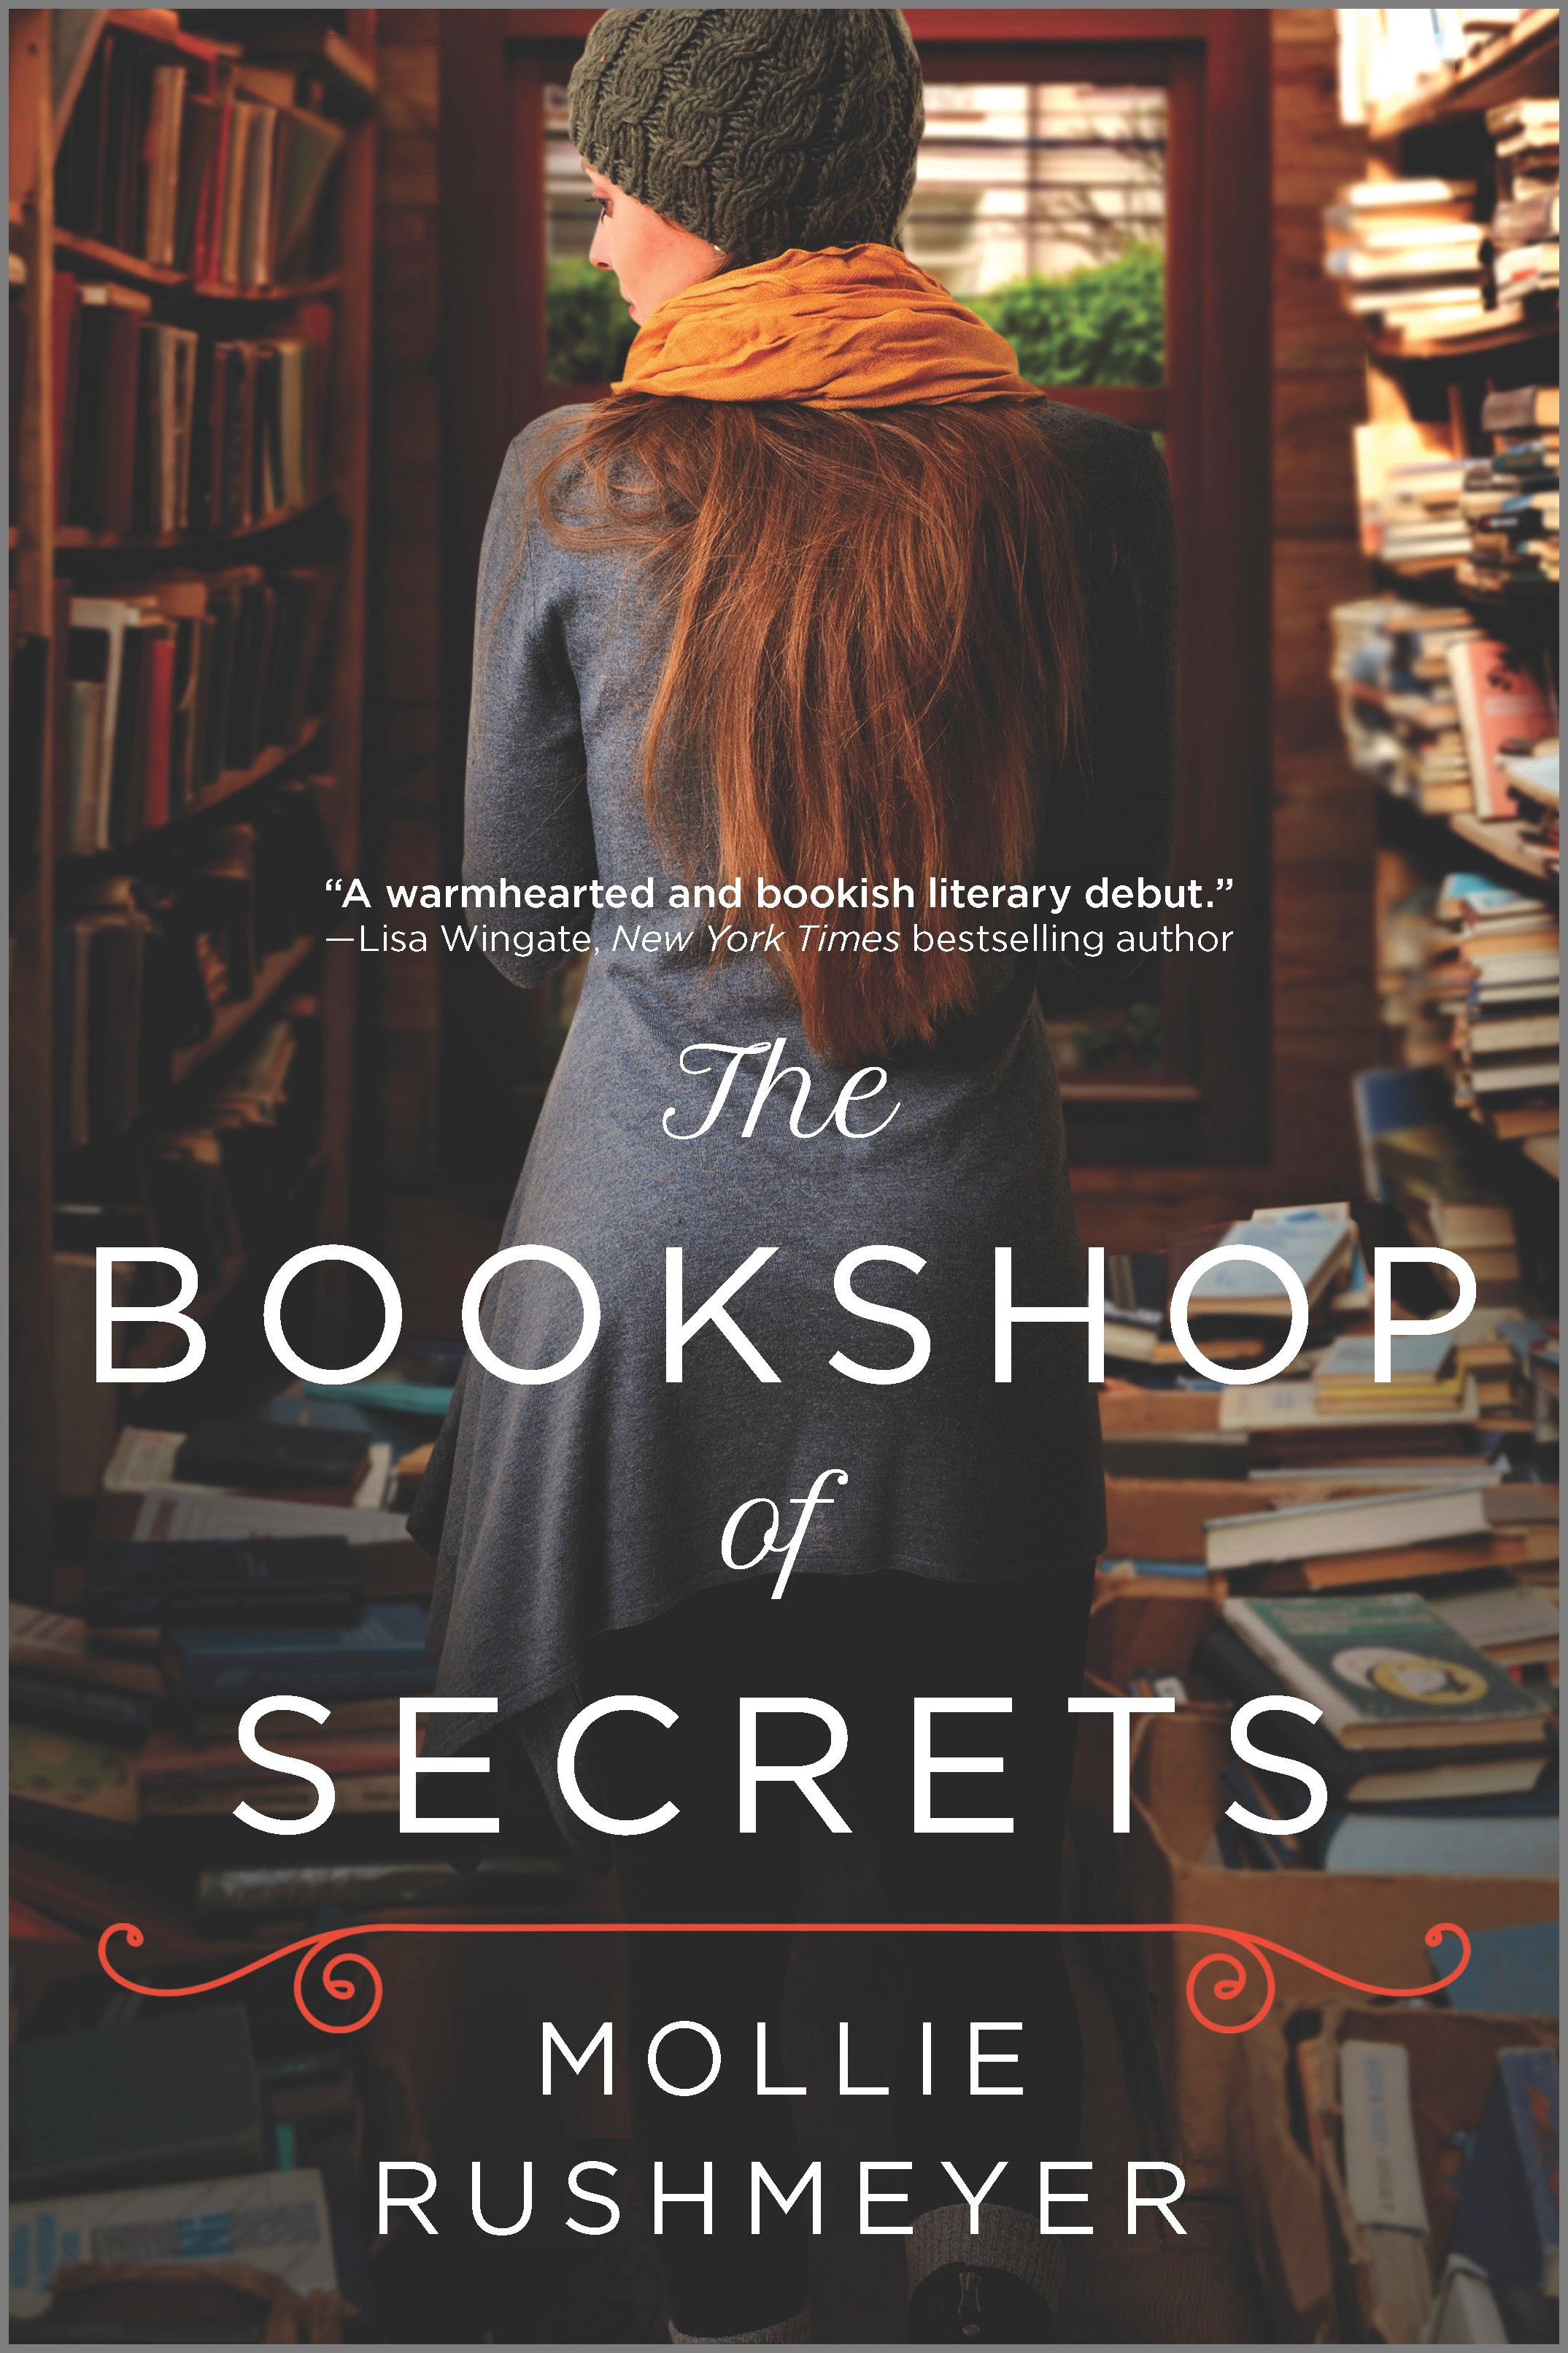 THE BOOKSHOP OF SECRETS by Mollie Rushmeyer